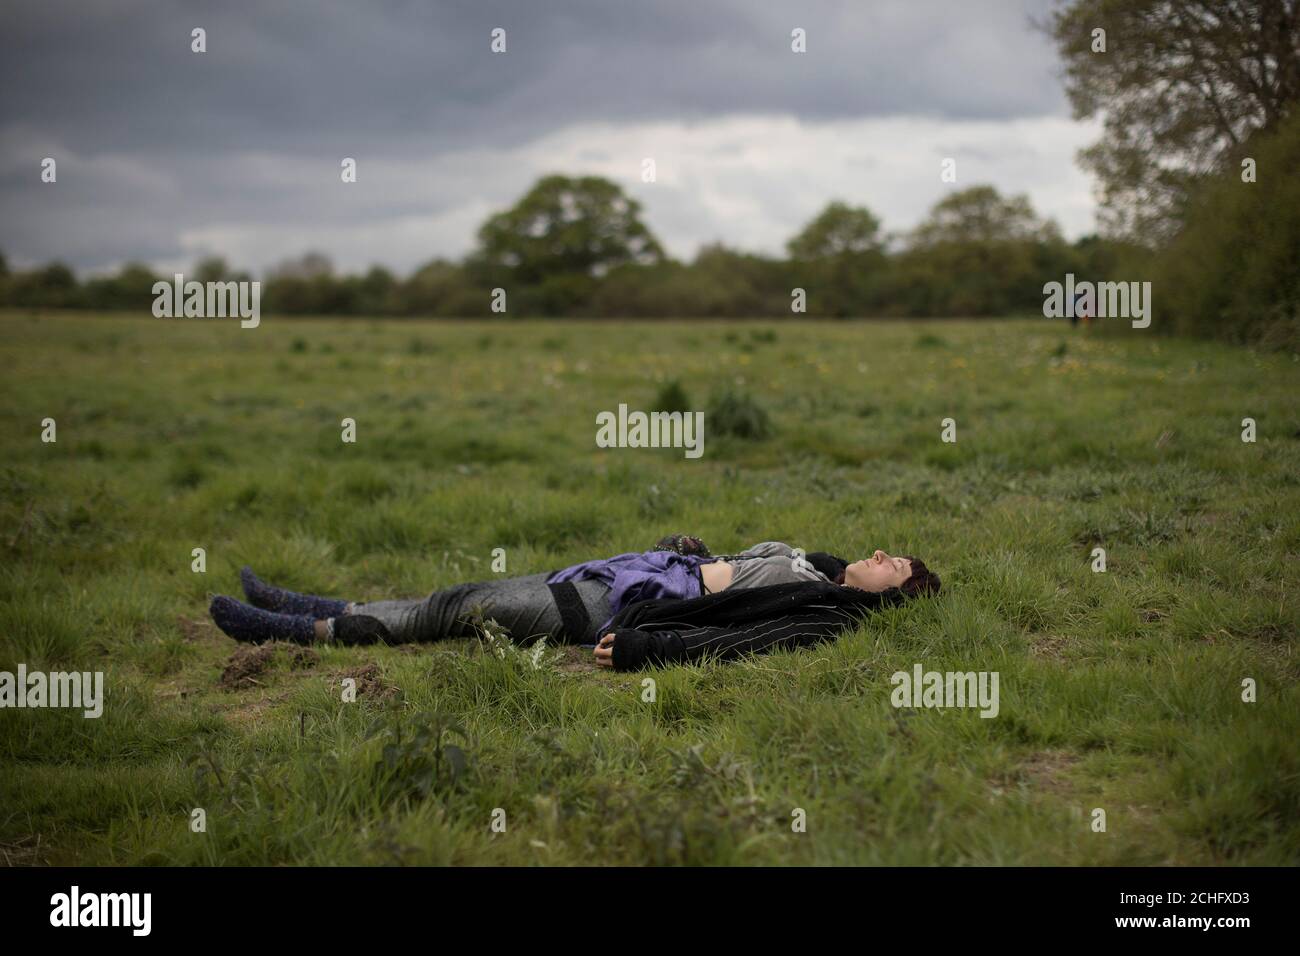 A protester sleeps in a field near the Stop HS2 protest camp near a development site for the High Speed 2 rail in Harefield, Britain April 28, 2019. REUTERS/Simon Dawson Stock Photo